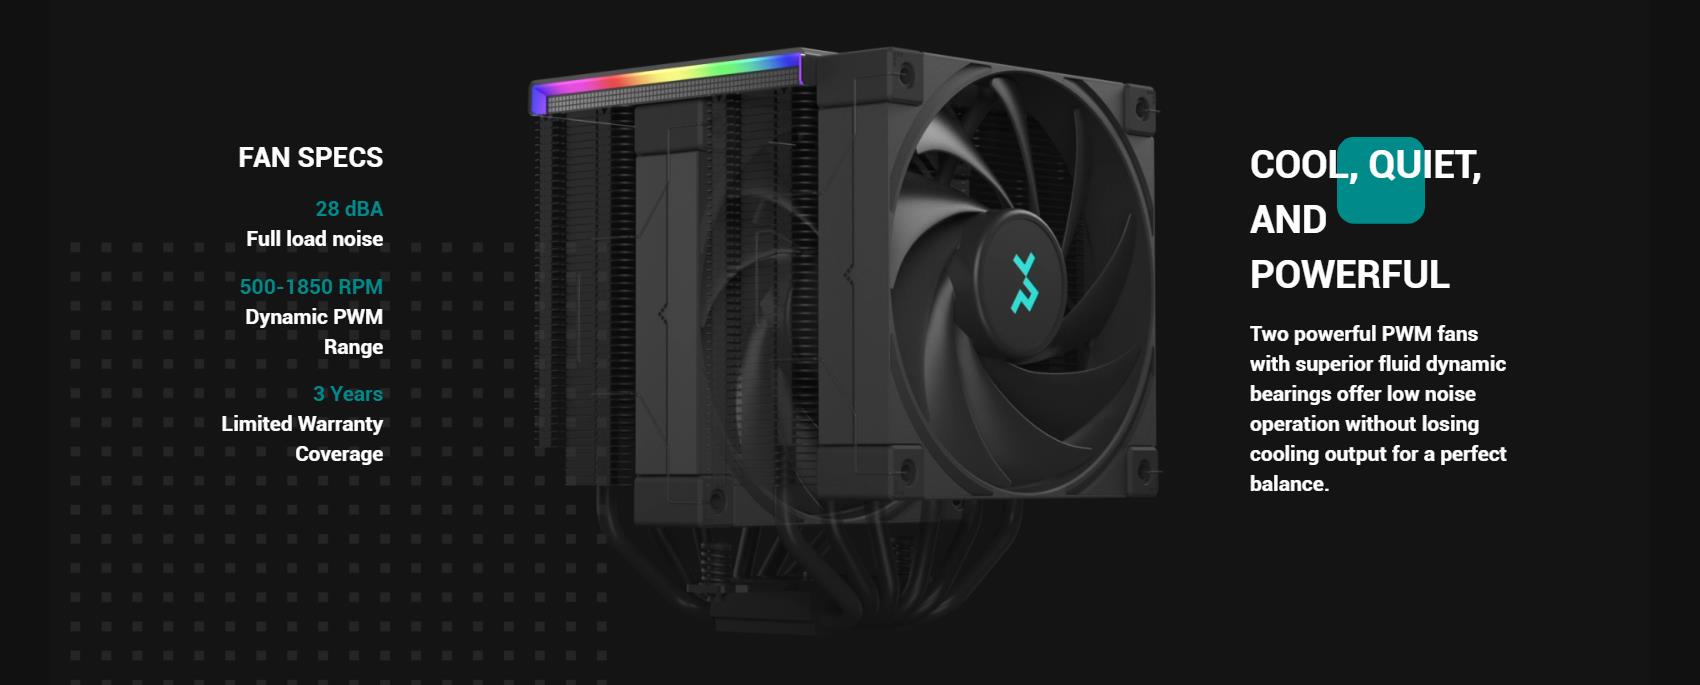 A large marketing image providing additional information about the product DeepCool AK620 Digital CPU Cooler - Black - Additional alt info not provided